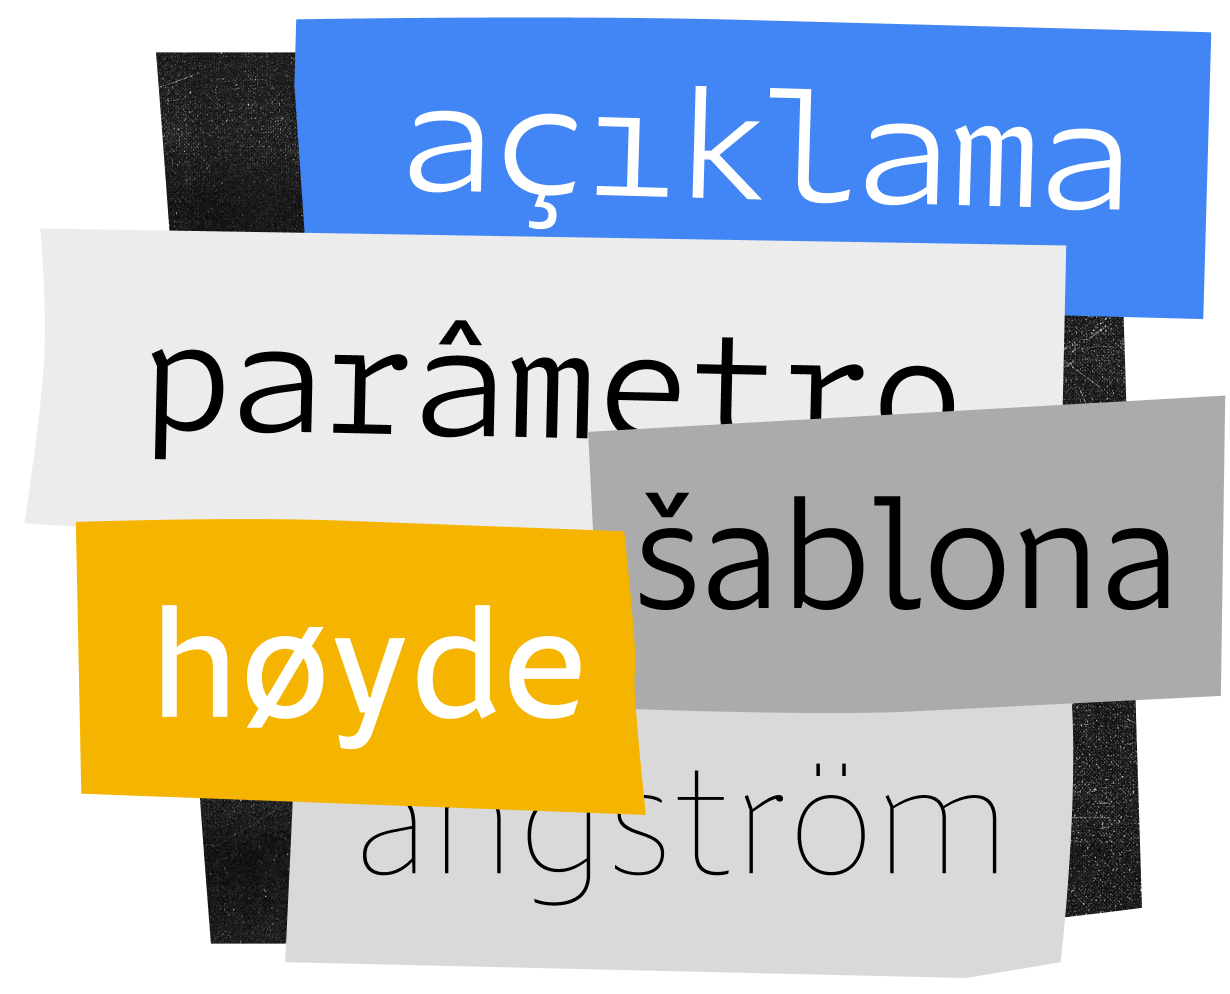 <b class="accent">FIG. 18 — </b> Portamento supports over 150 languages.